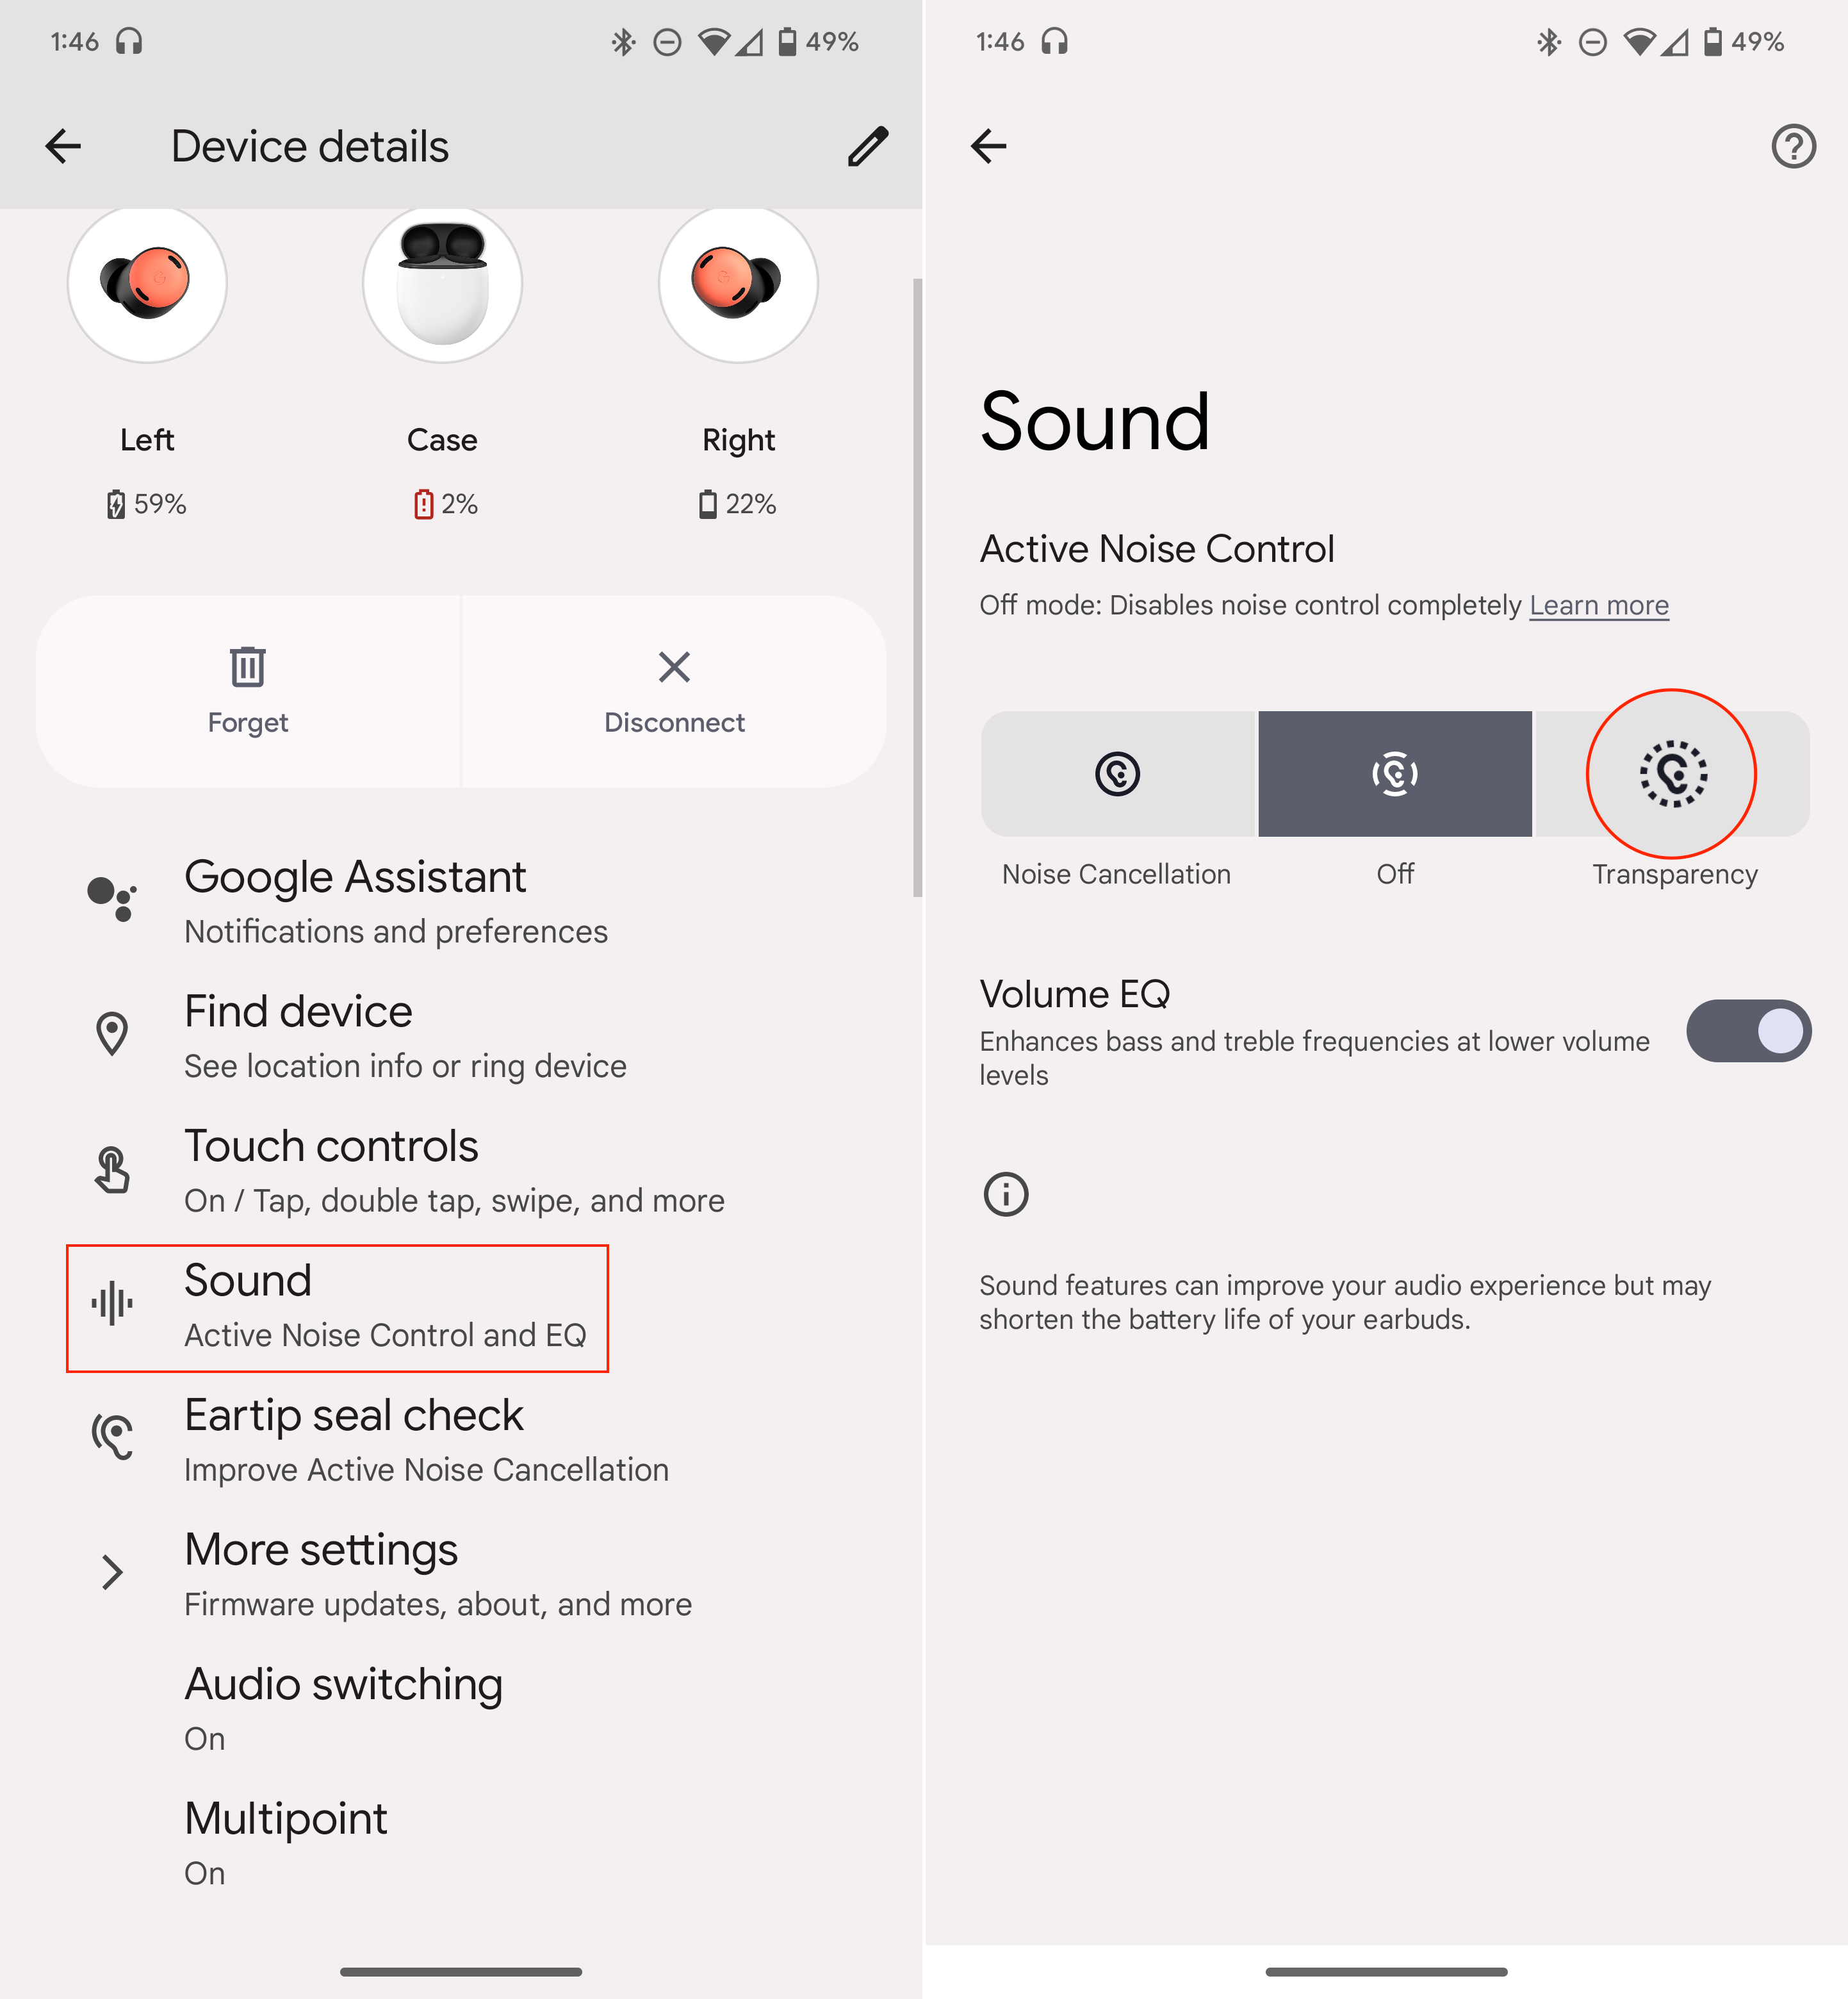 Manually enable Transparency mode on Pixel Buds Pro